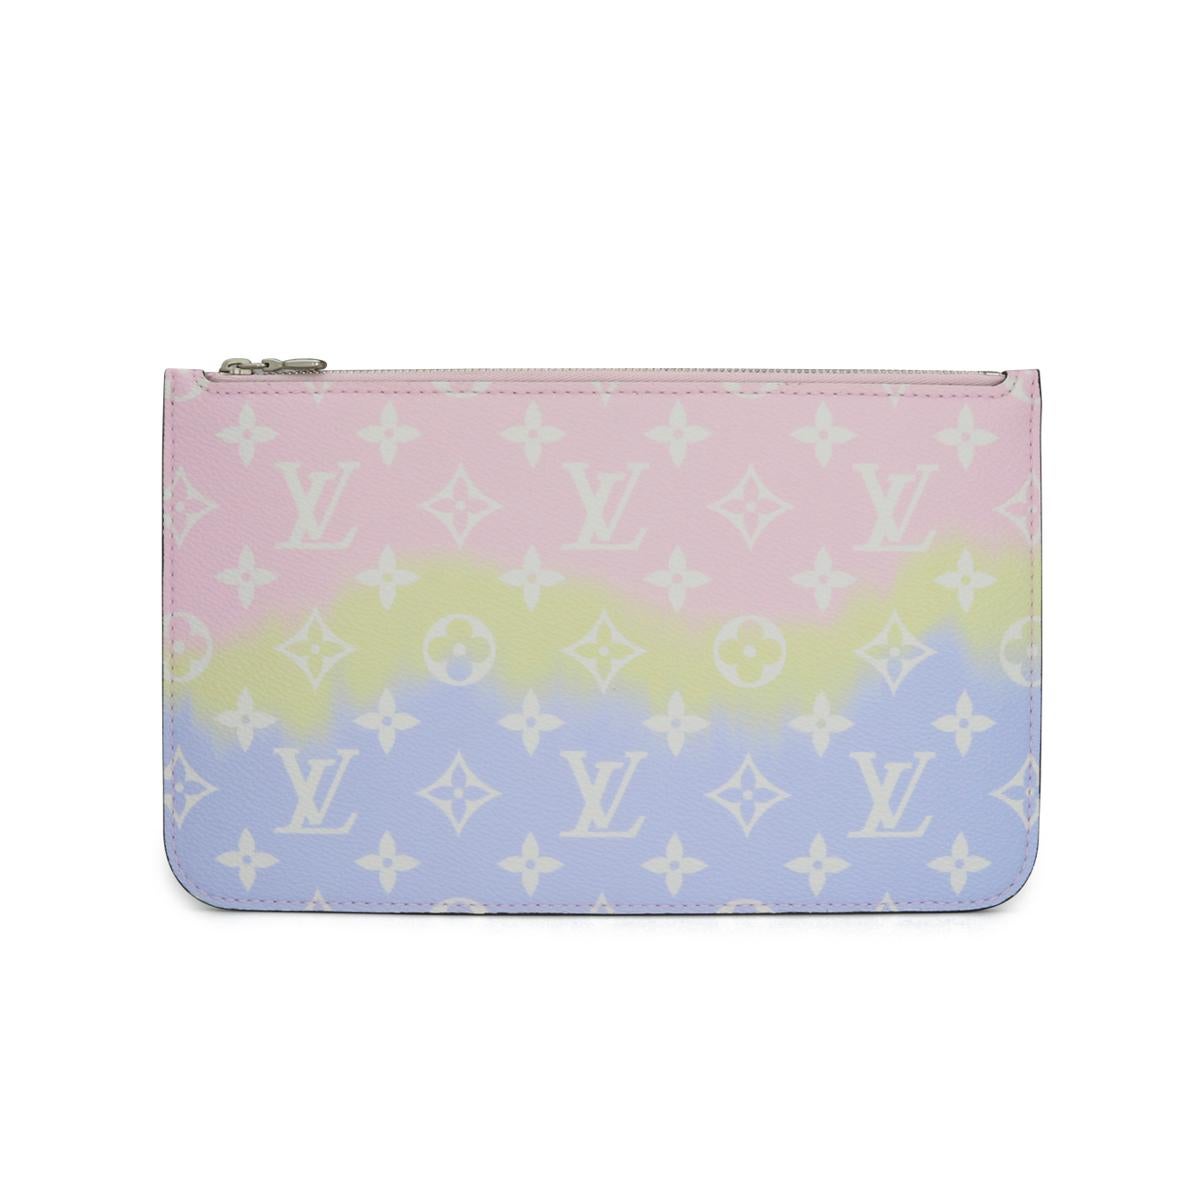 Louis Vuitton Escale Neverfull MM Bag in Pastel 2020 Limited Edition For Sale 11